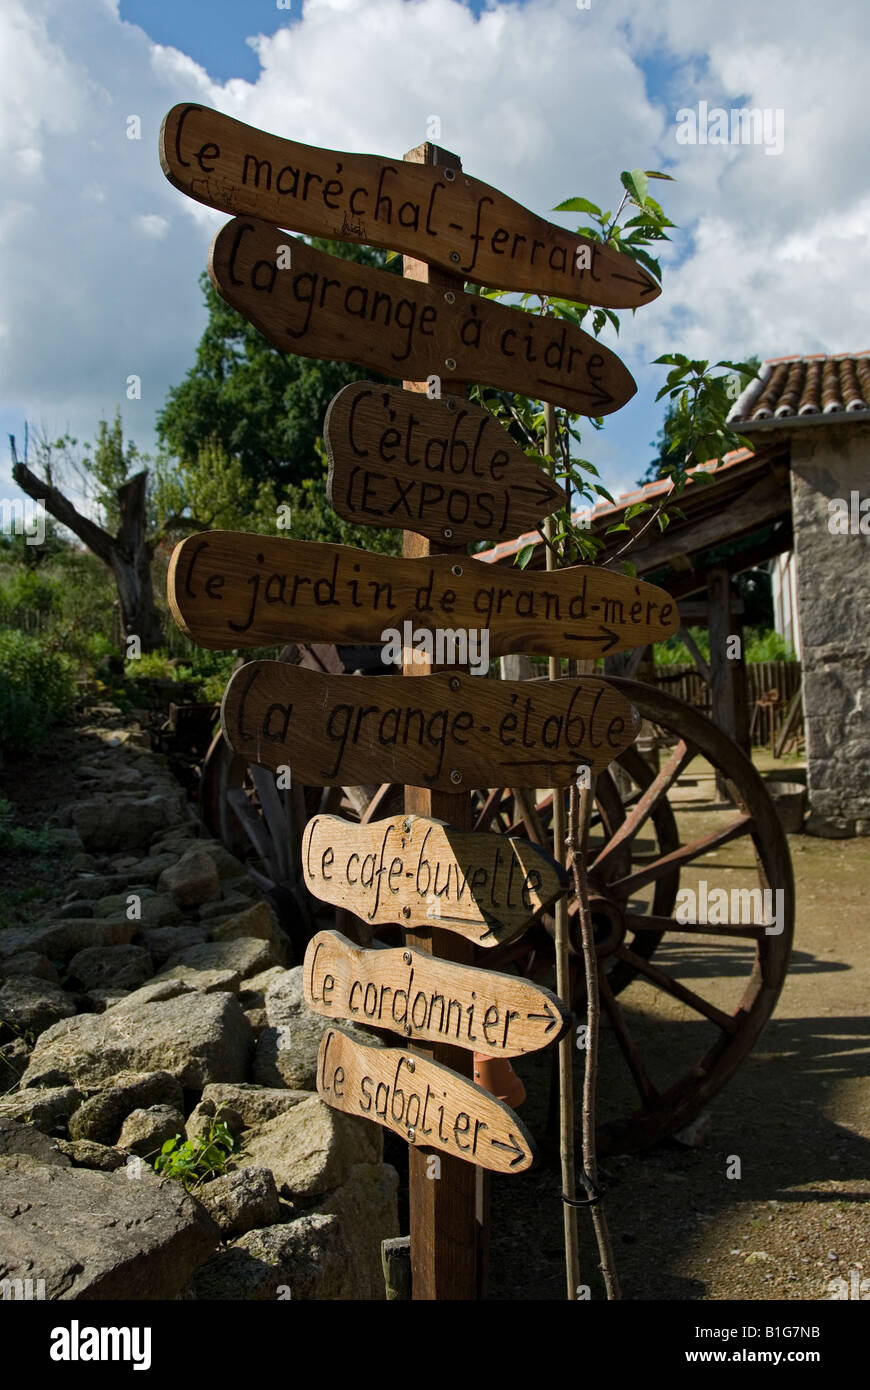 Stock photo of a signpost in the village of Montrol Senard showing directions to the various renovated buildings Stock Photo